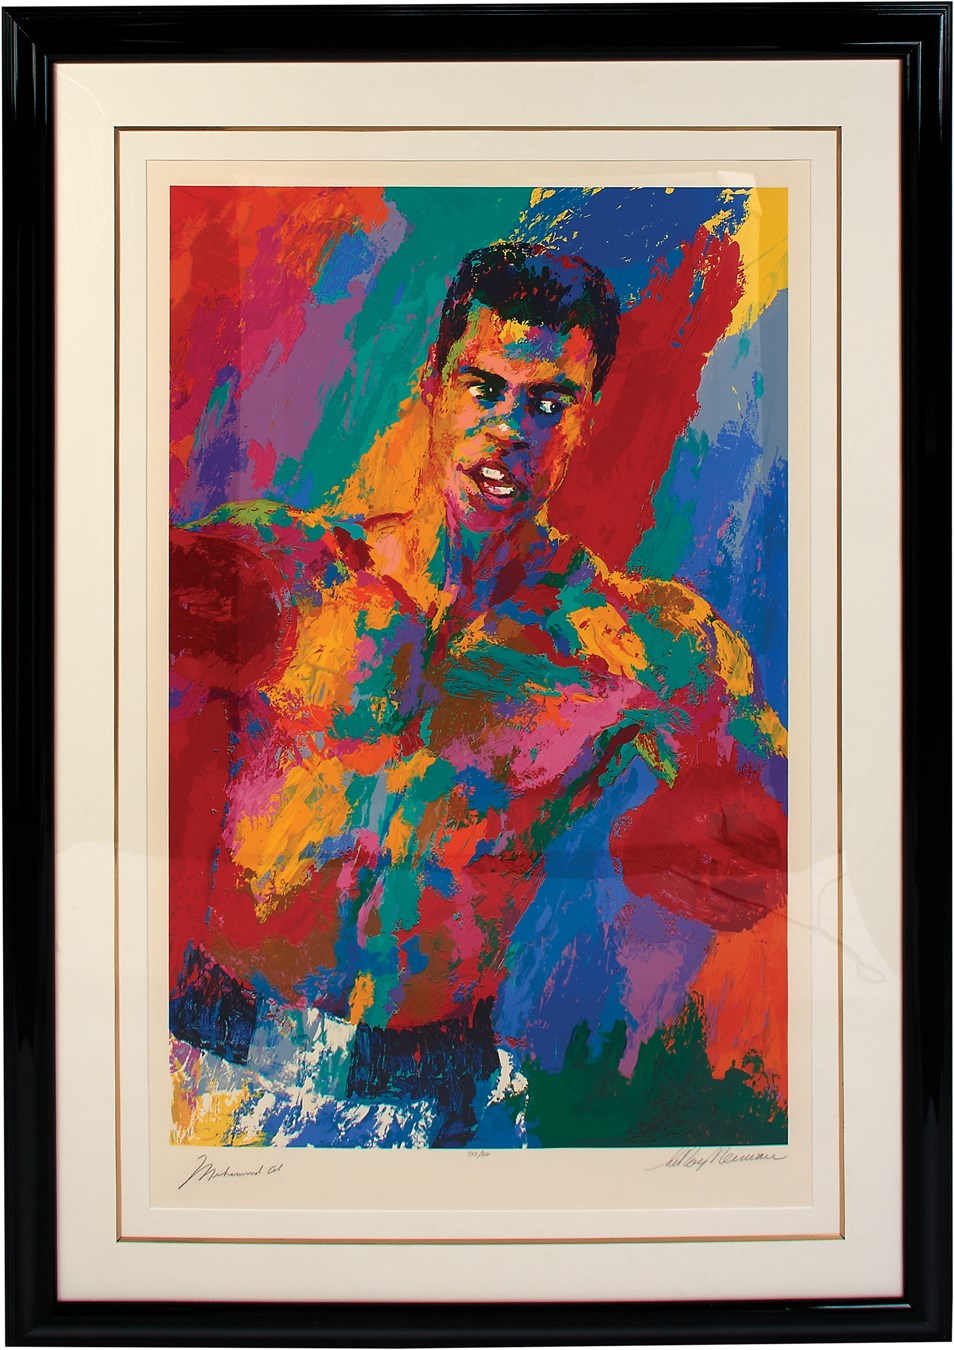 Muhammad Ali & Boxing - Muhammad Ali Signed "Athlete of the Century" Limited Edition Serigraph by LeRoy Neiman